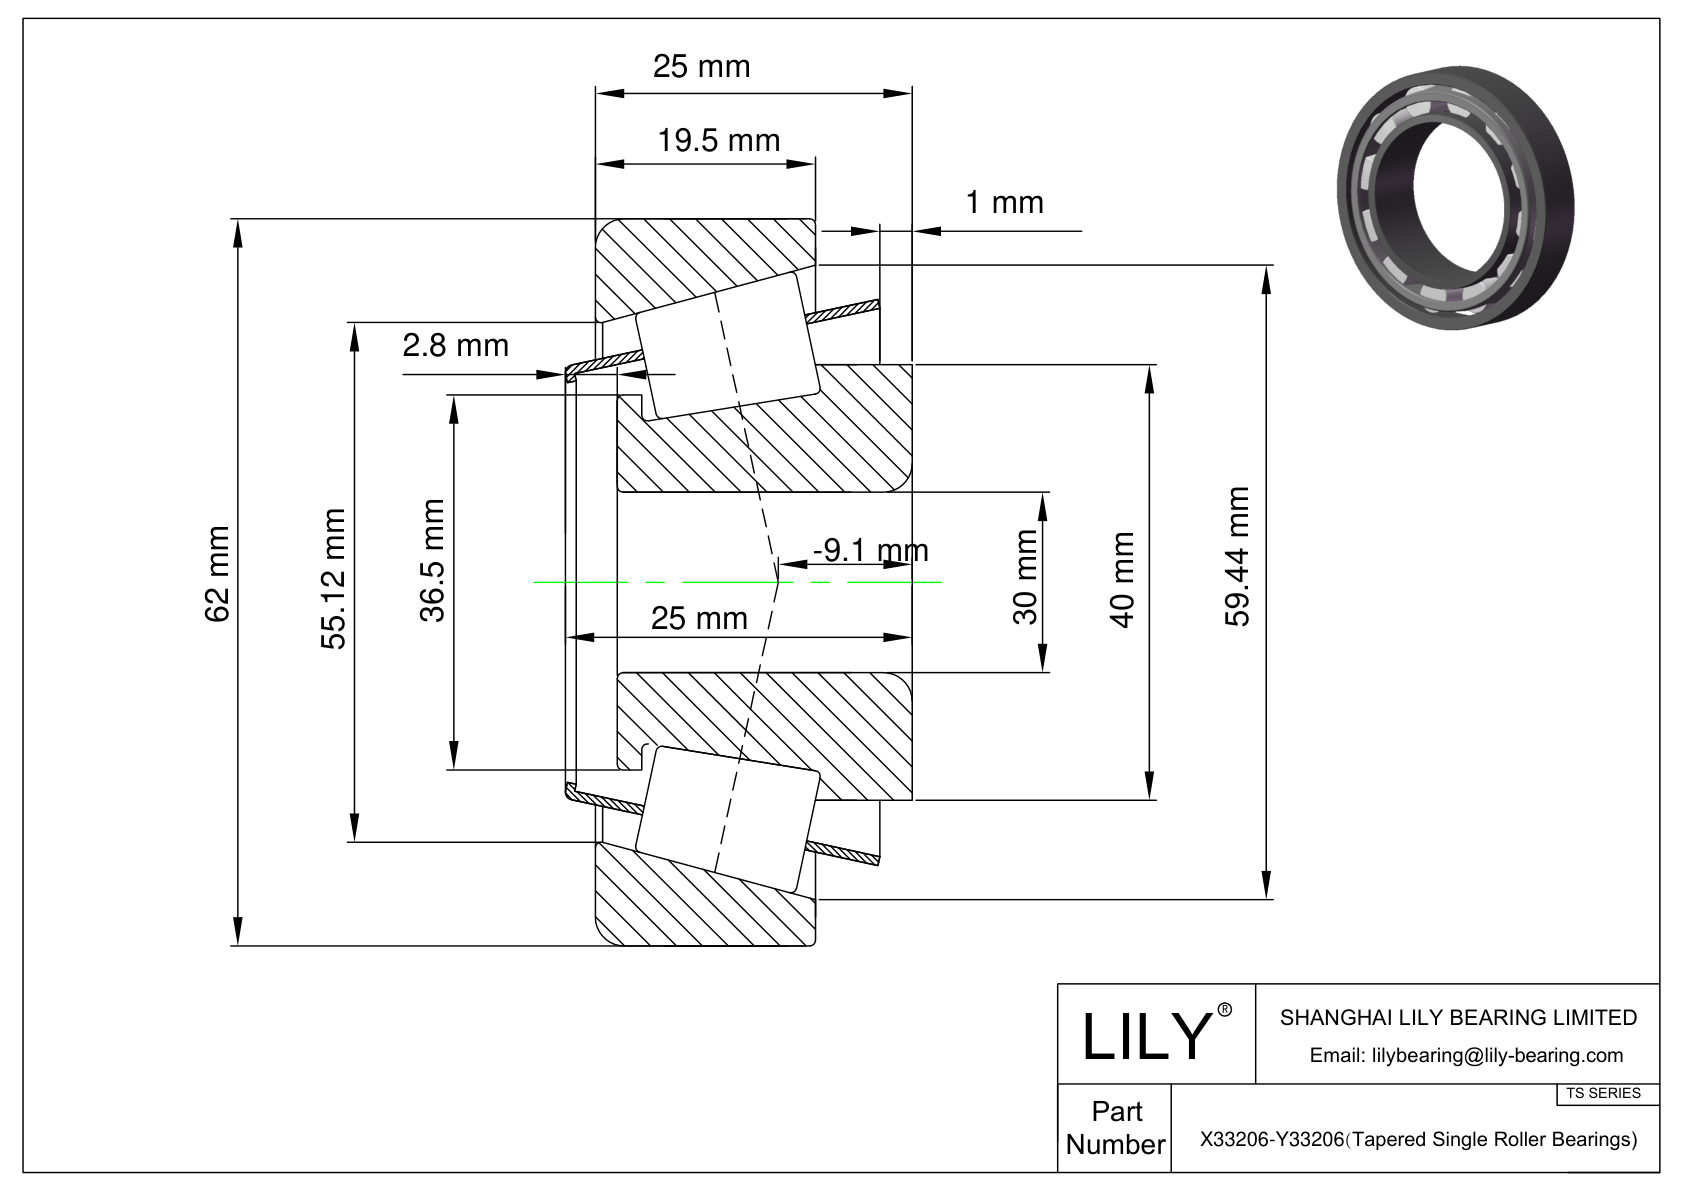 X33206-Y33206 TS (Tapered Single Roller Bearings) (Metric) cad drawing